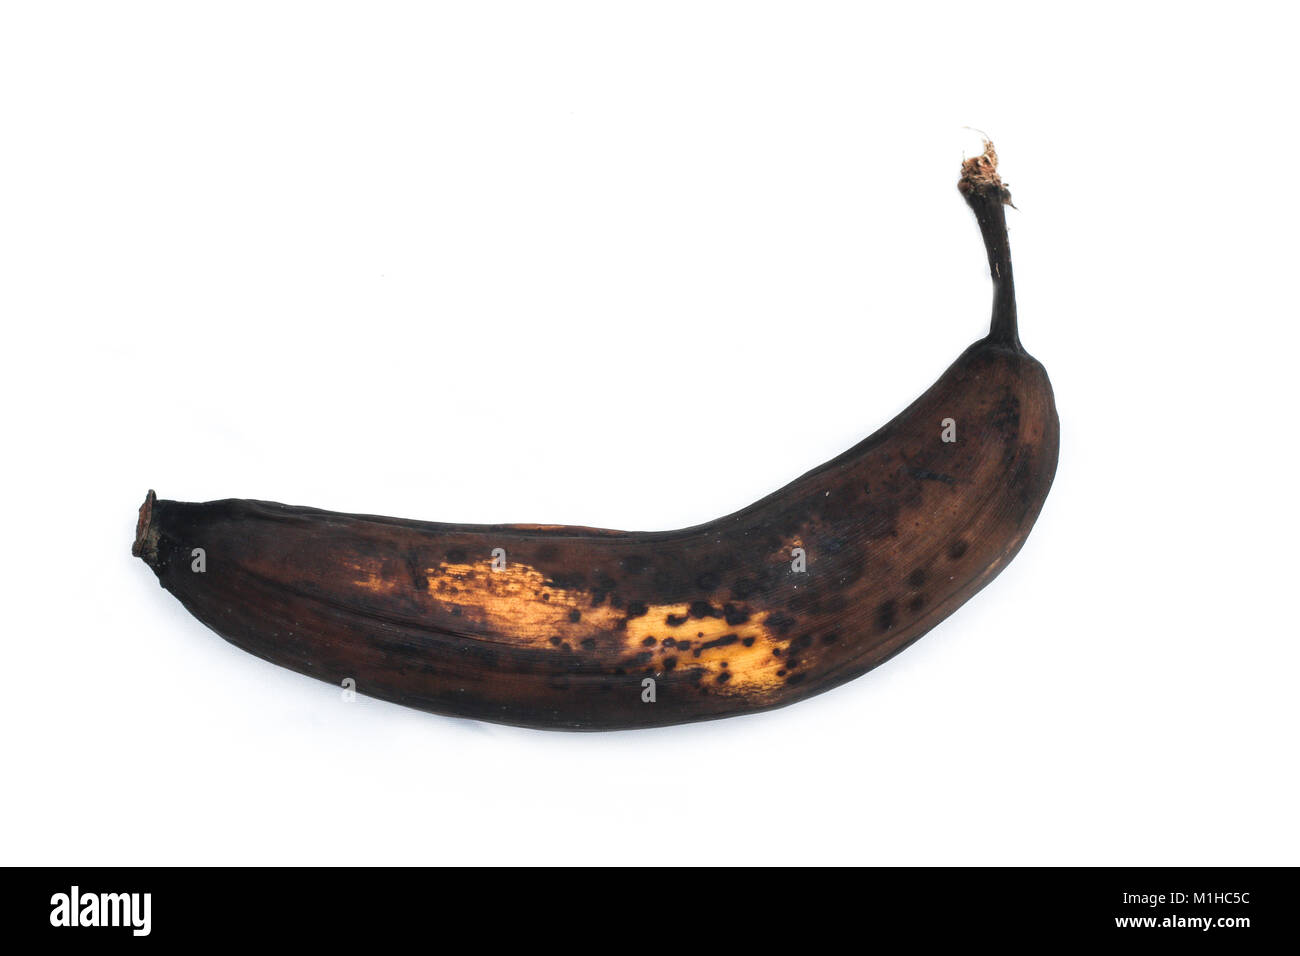 A picture of an ordinary overripe banana. It looks ugly, but still can be sweet and good to eat. Stock Photo